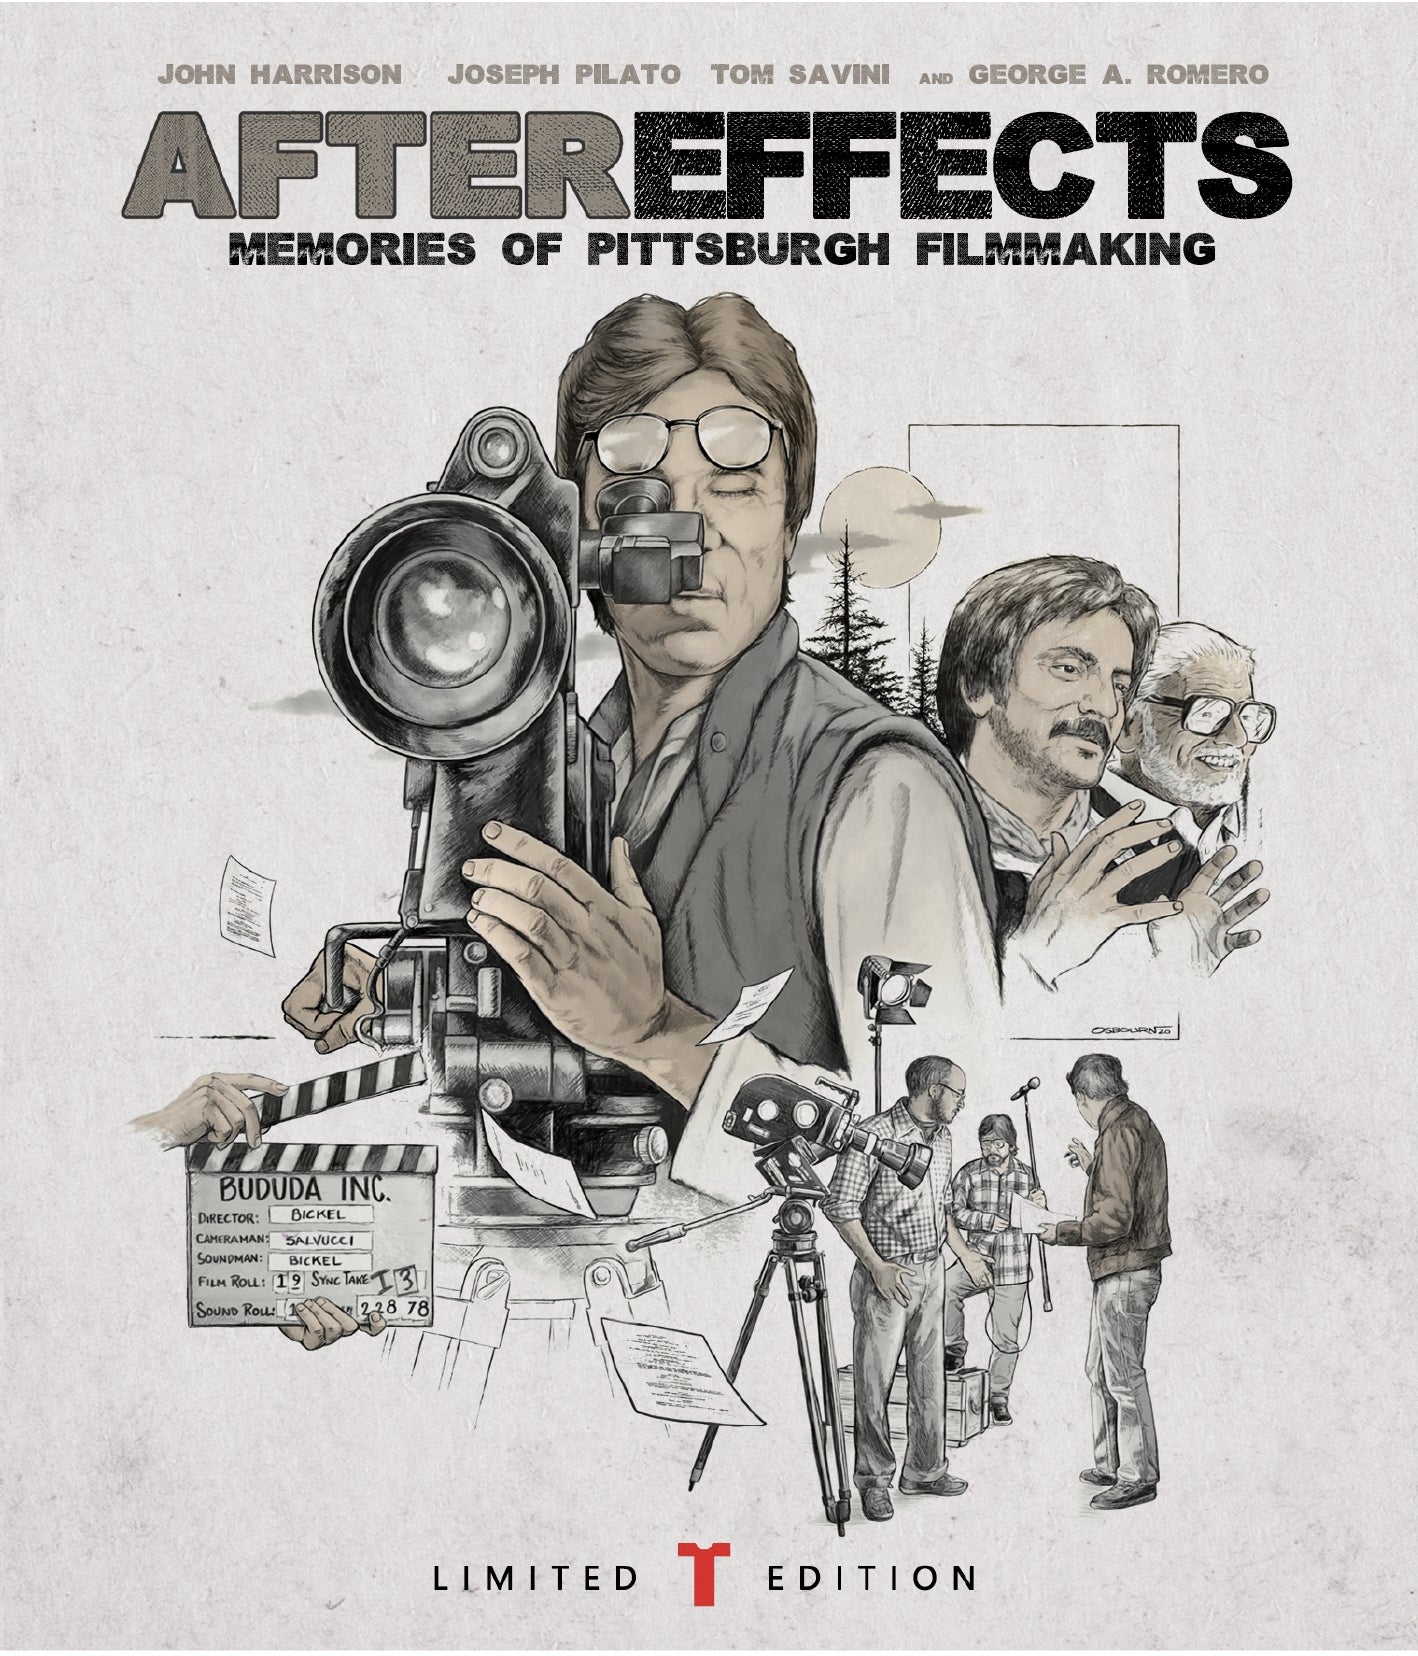 AFTEREFFECTS: MEMORIES OF PITTSBURGH FILMMAKING BLU-RAY